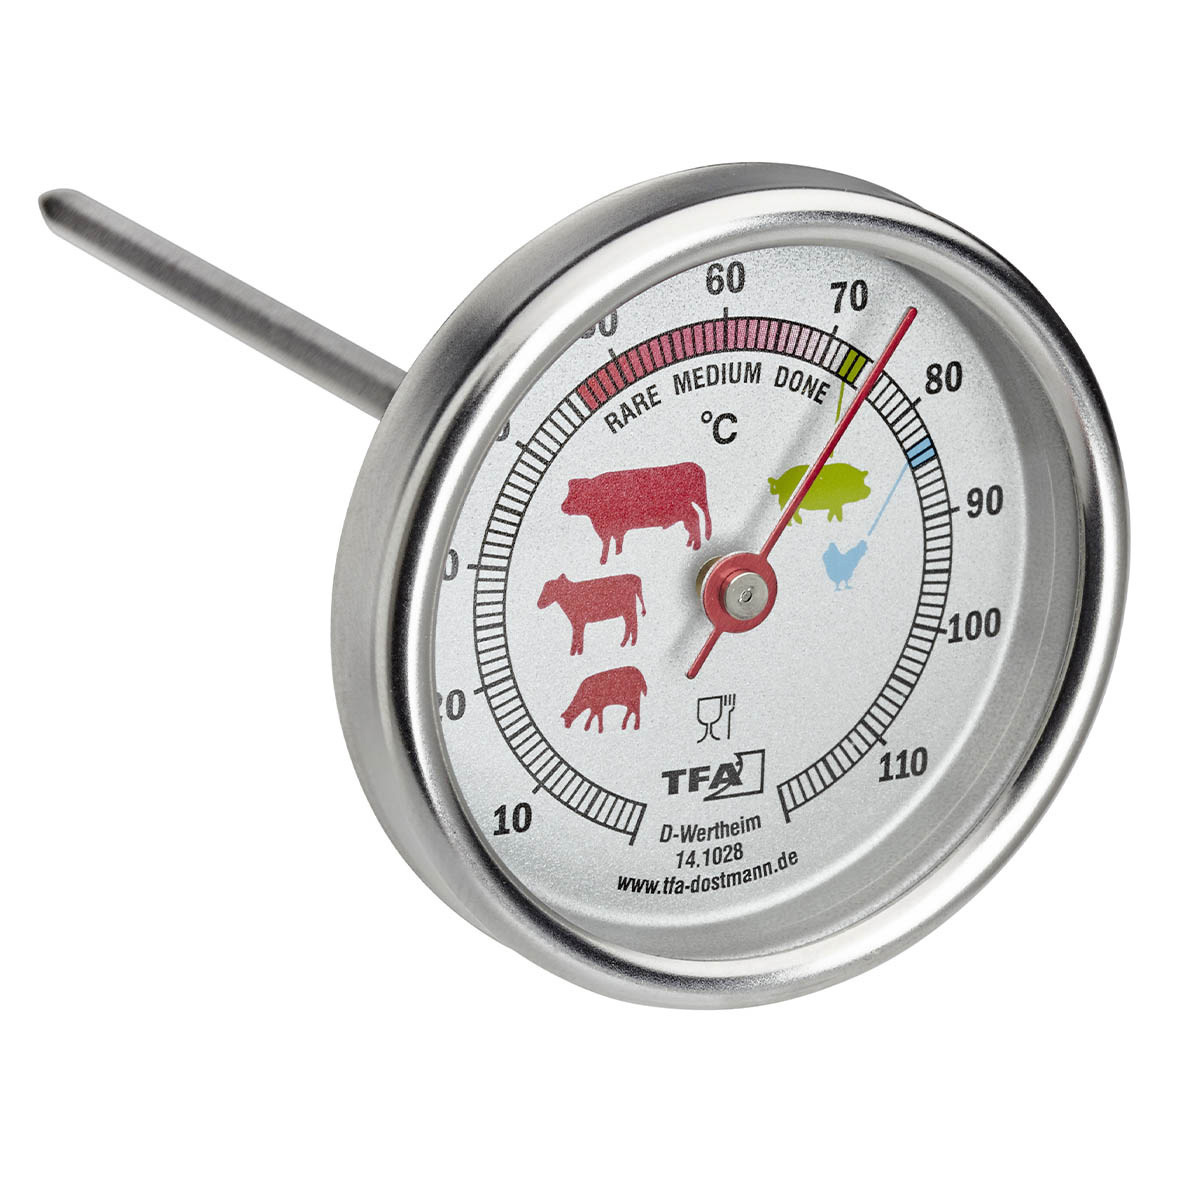 Made of Stainless Steel 14.1028 Meat Thermometer for Grill or Oven Silver TFA Dostmann Analoge Roast 